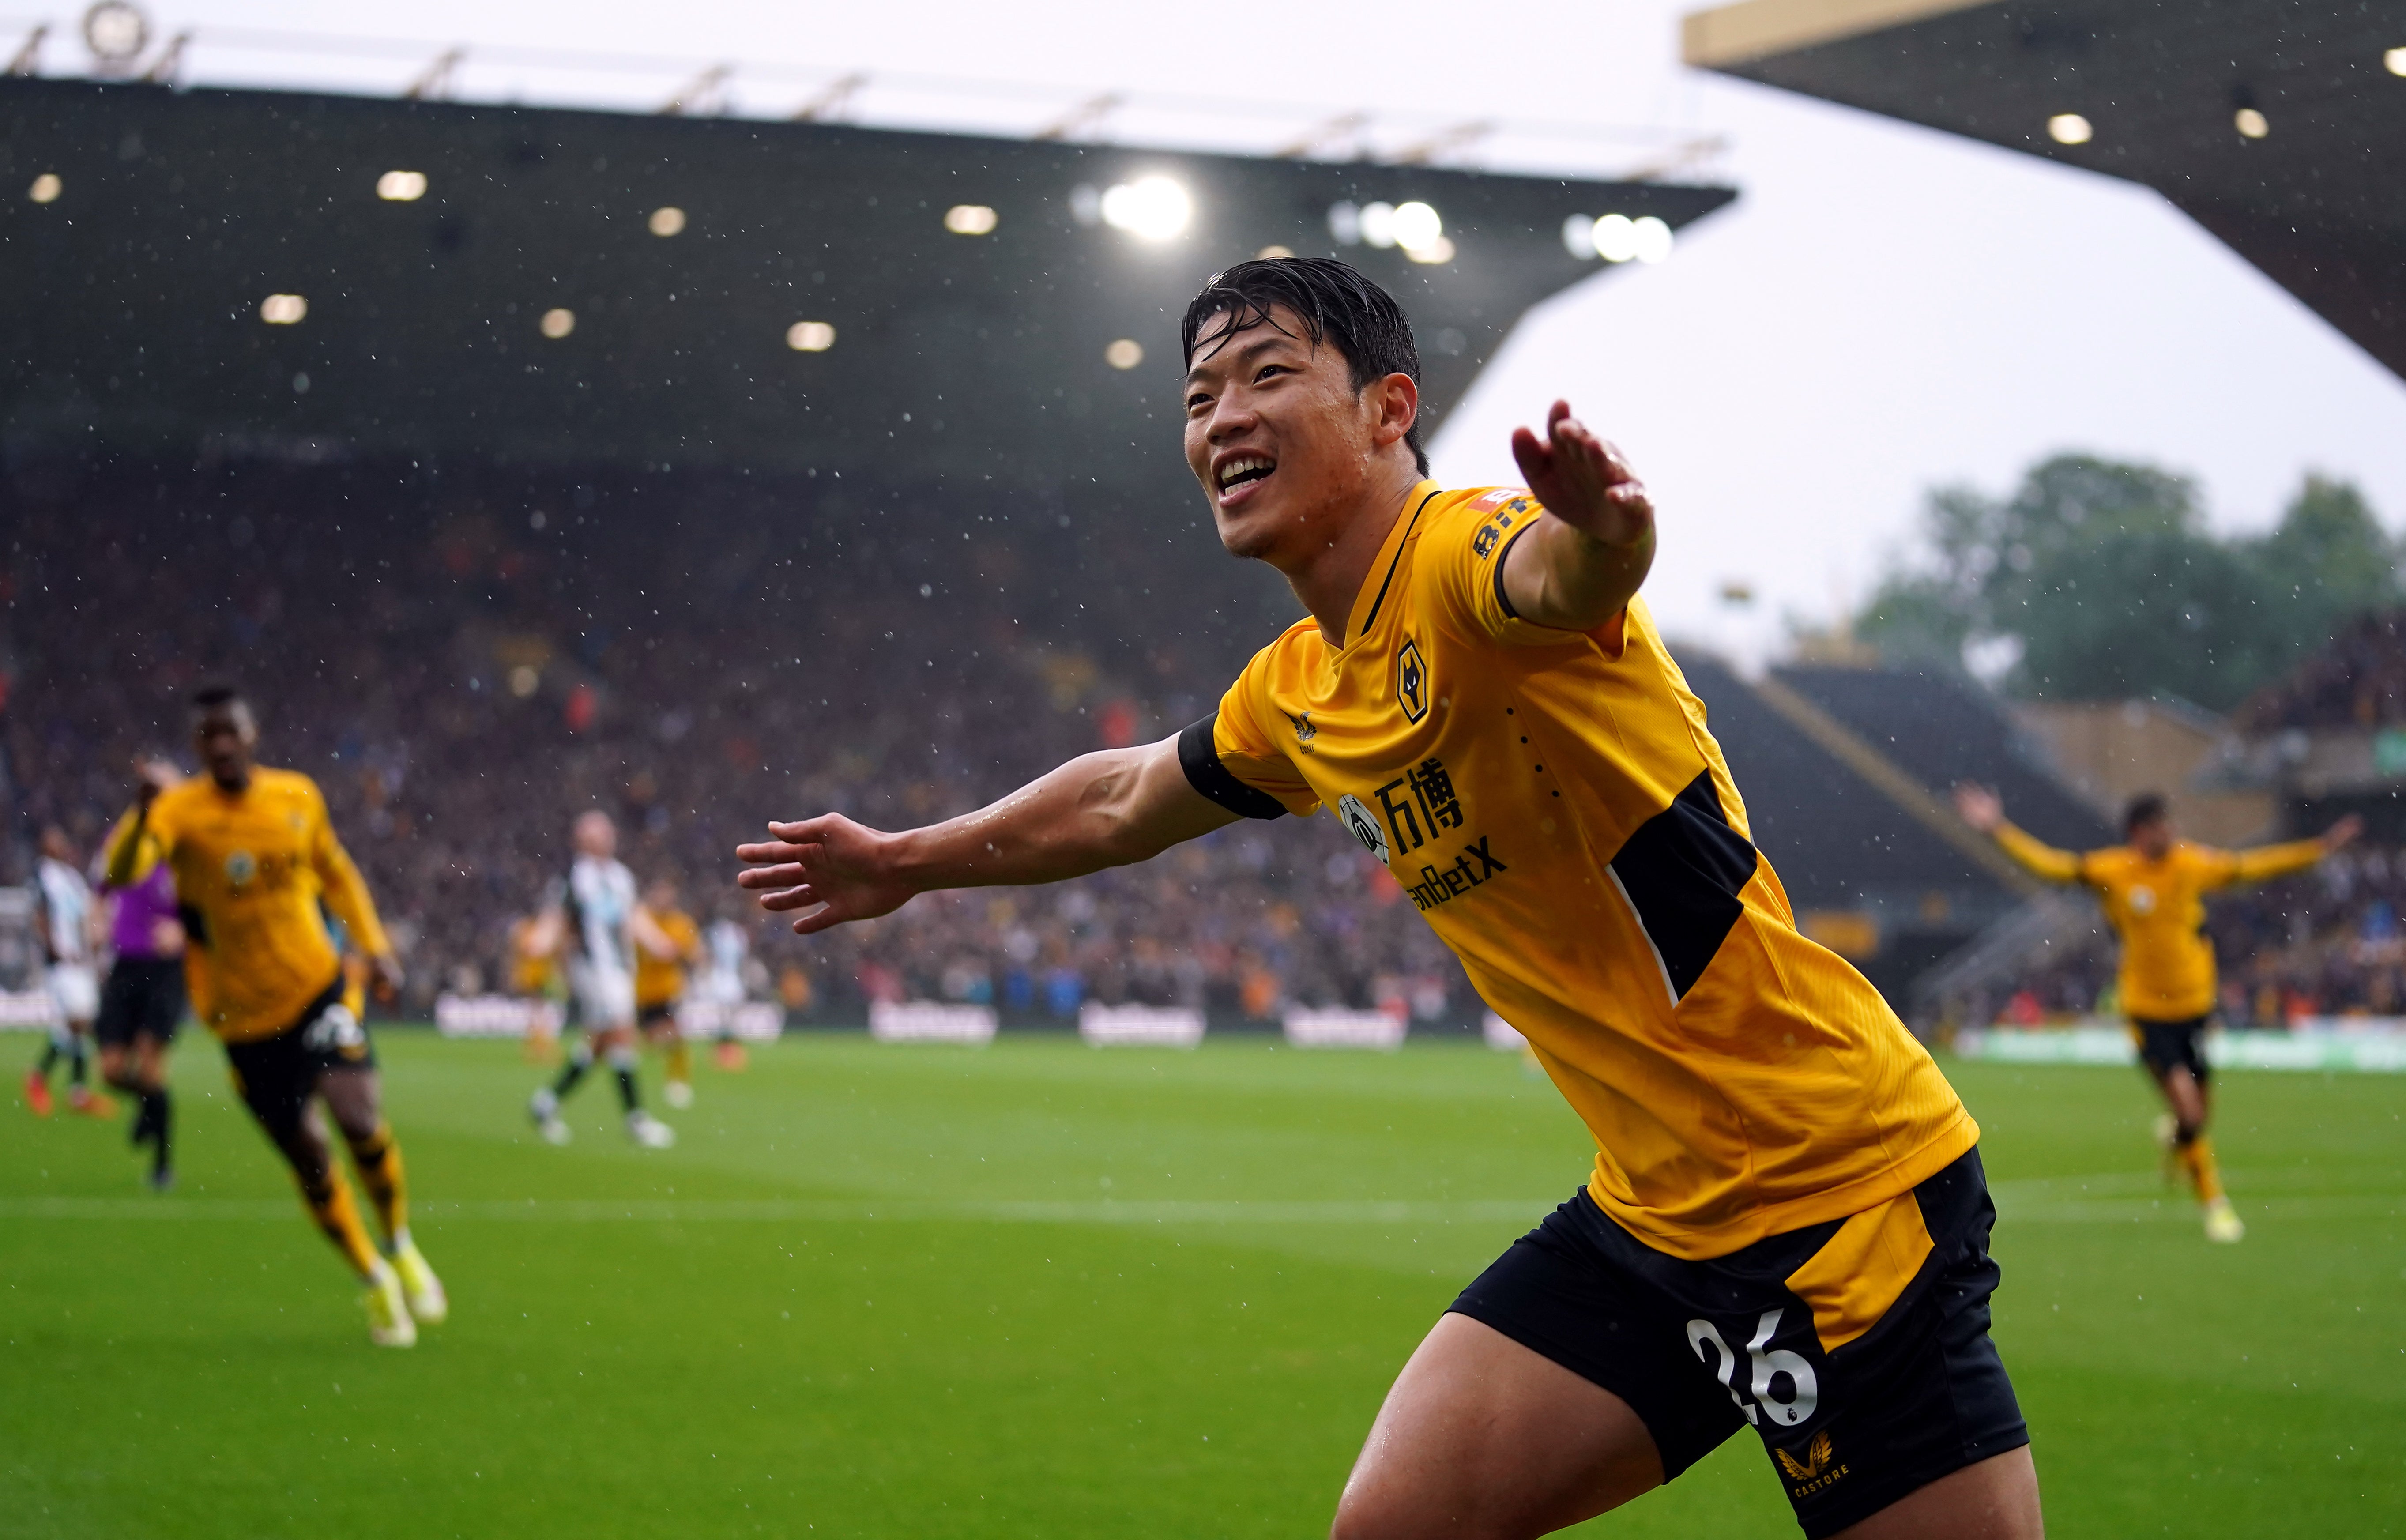 Wolves’ Hwang Hee-chan celebrates his first goal against Newcastle. (Nick Potts/PA)